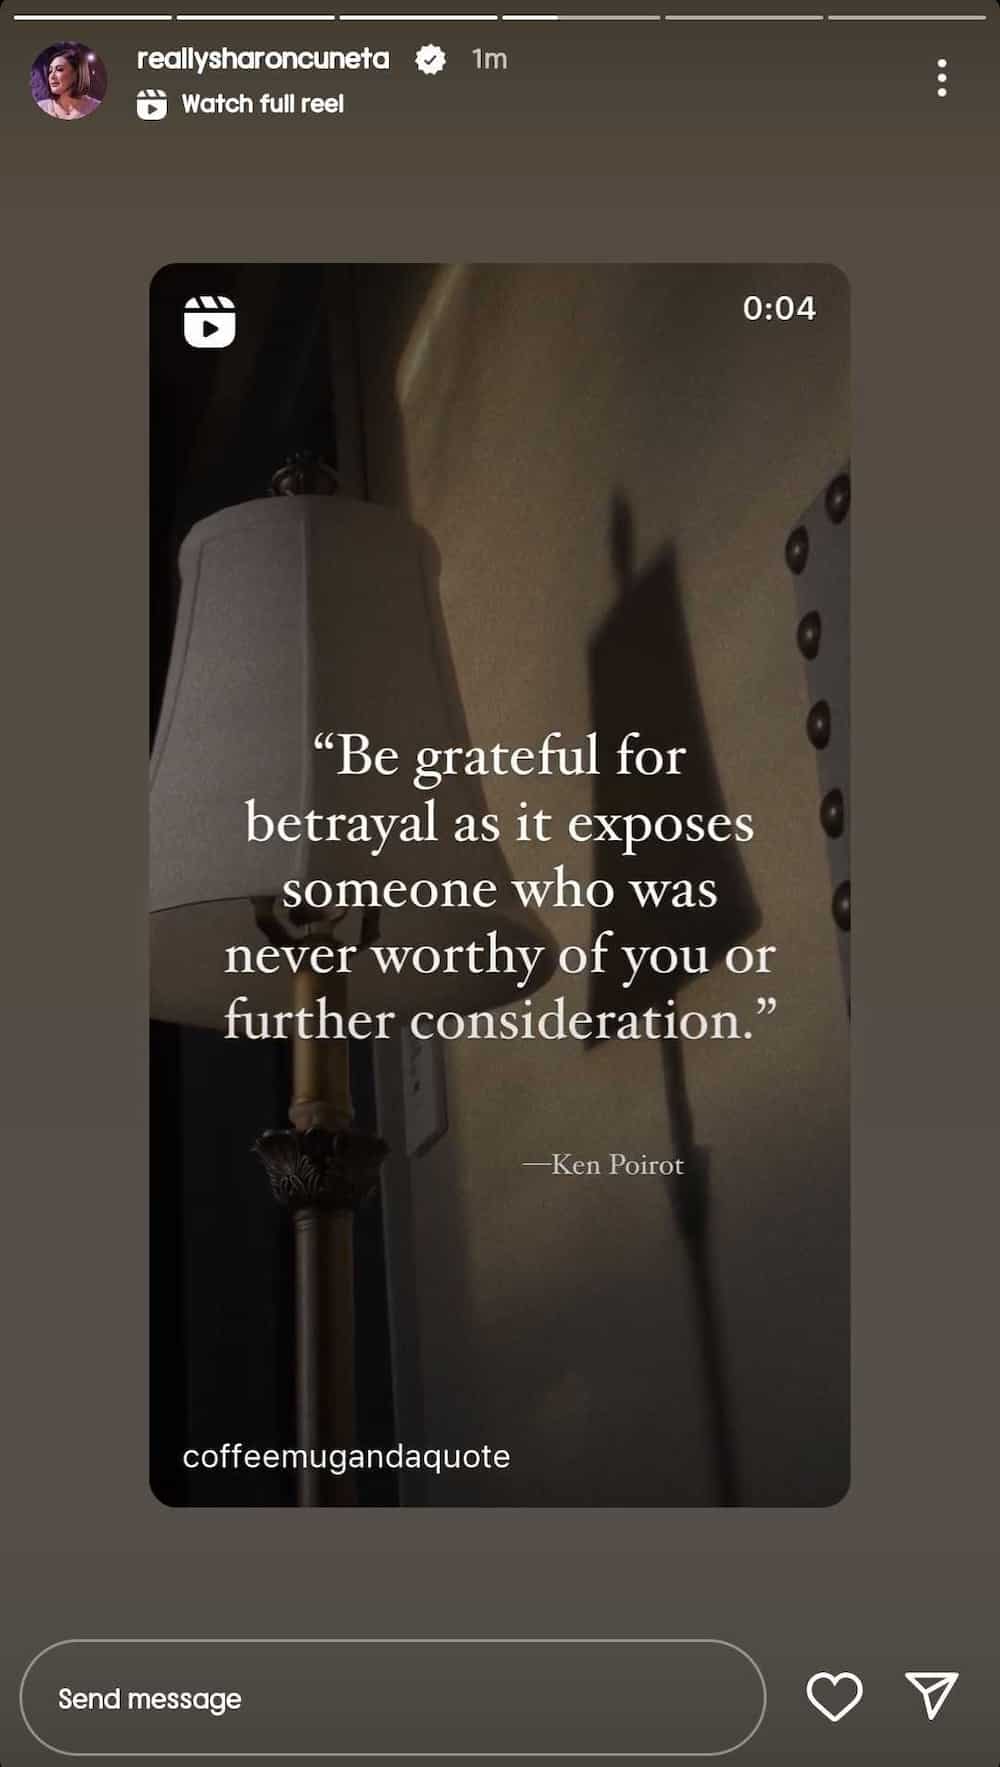 Sharon Cuneta shares a quote card about being grateful for betrayal